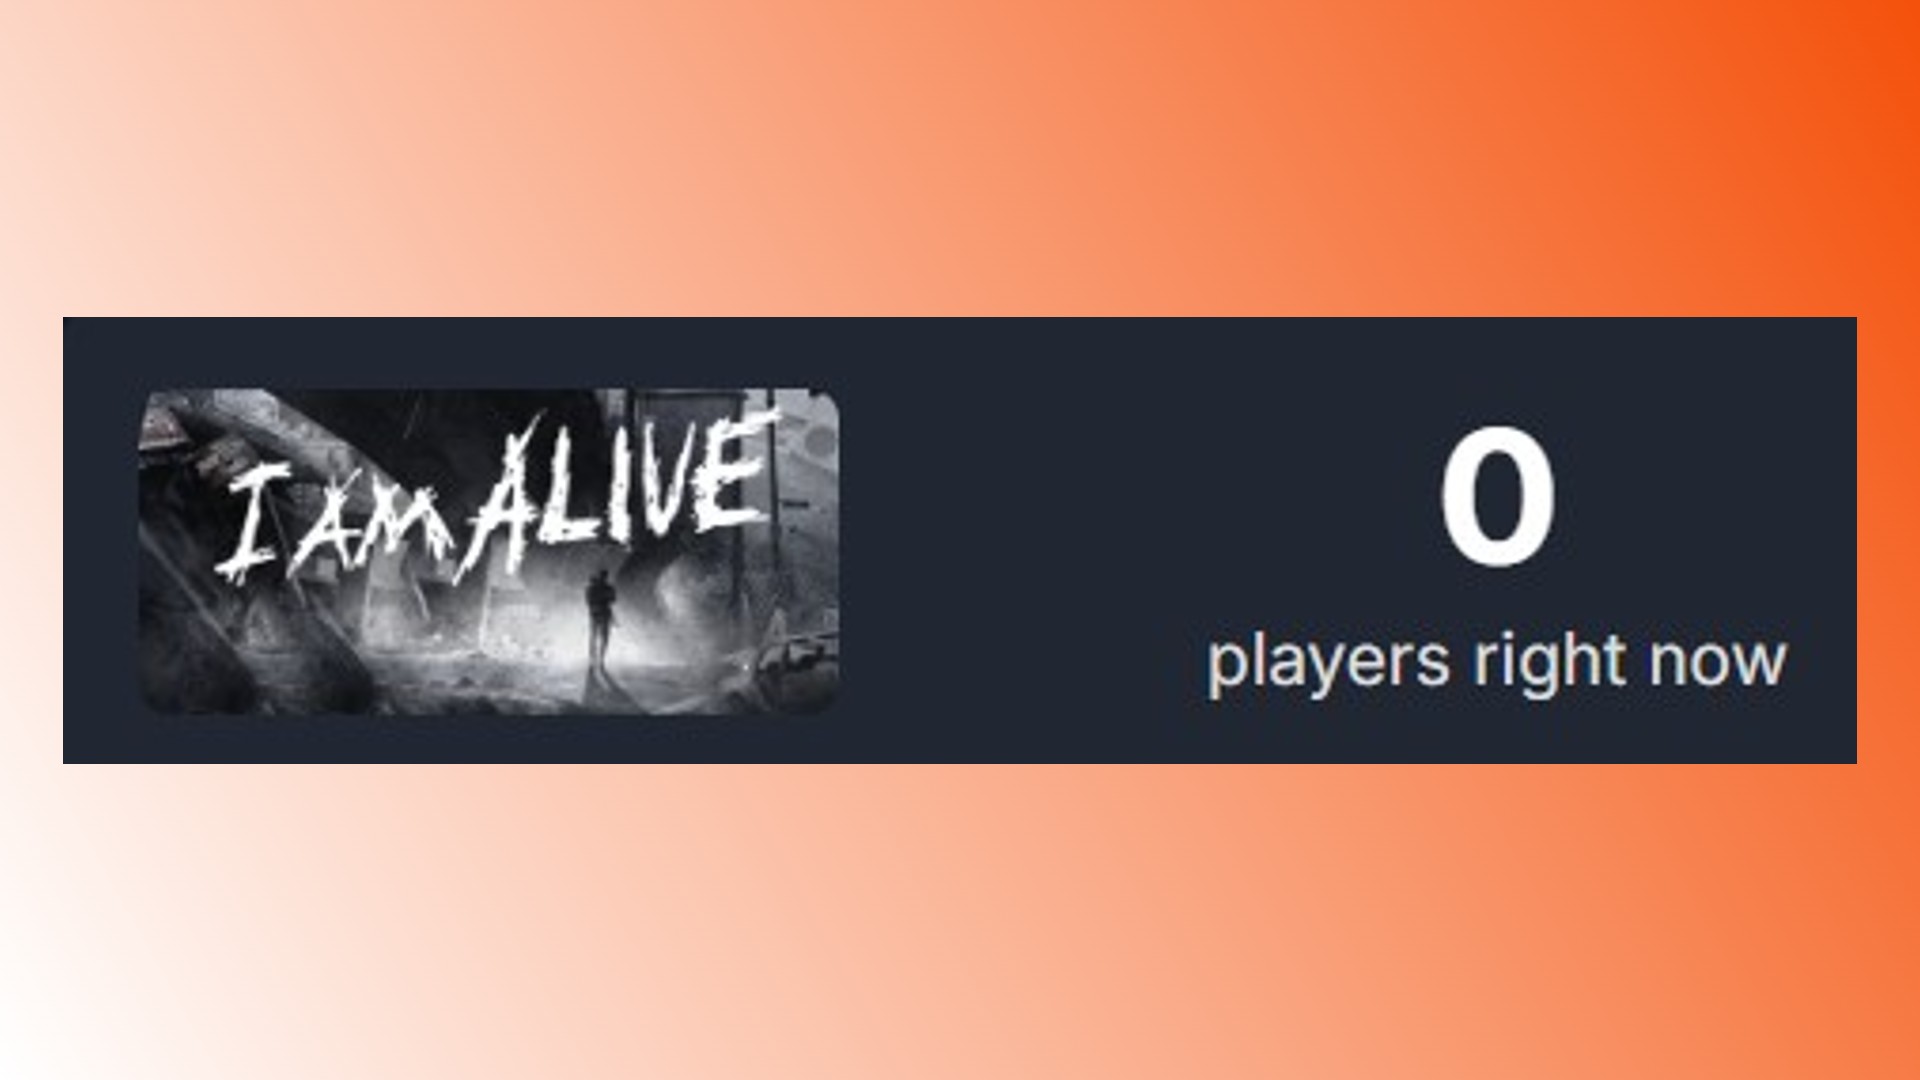 Steam zero players: The I Am Alive Steam player count, for the Ubisoft survival game